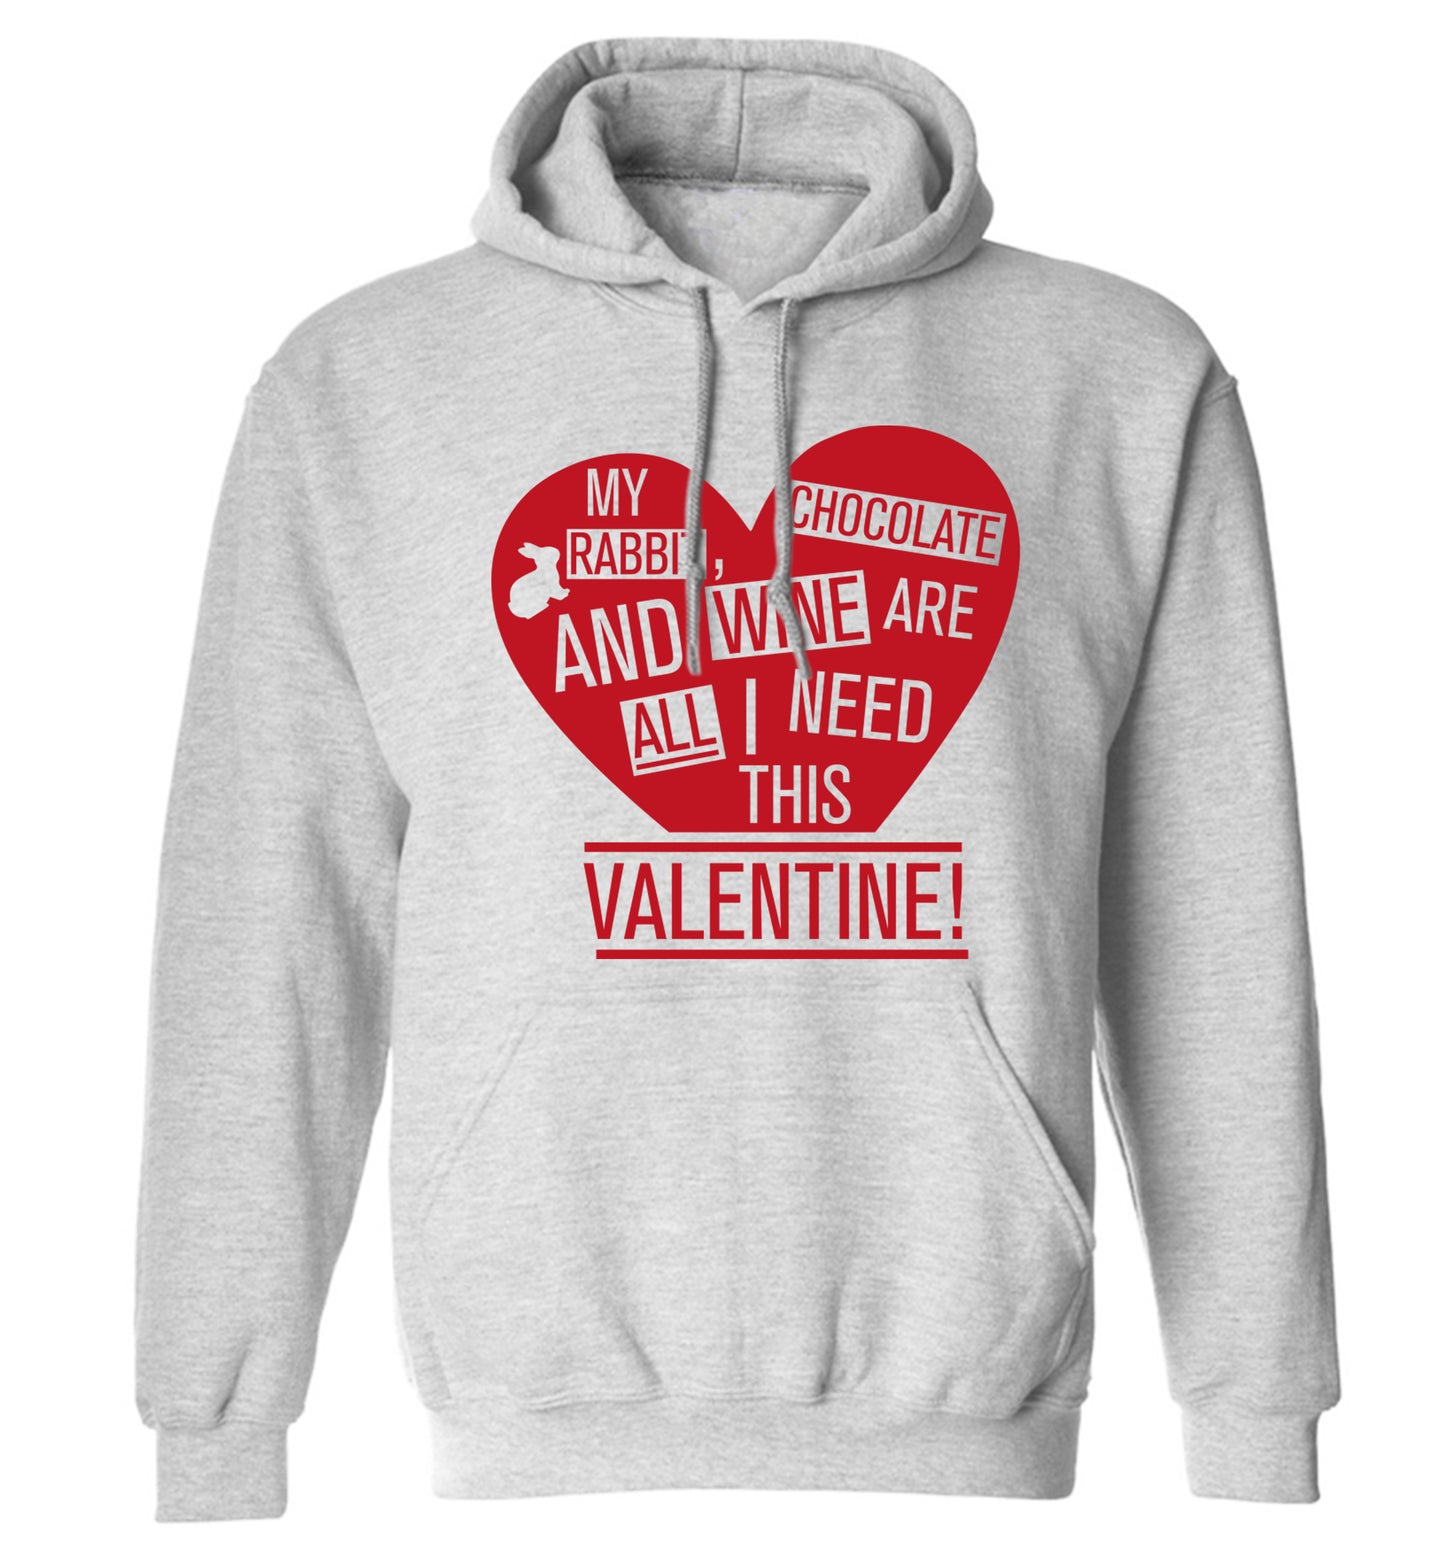 My rabbit, chocolate and wine are all I need this valentine! adults unisex grey hoodie 2XL